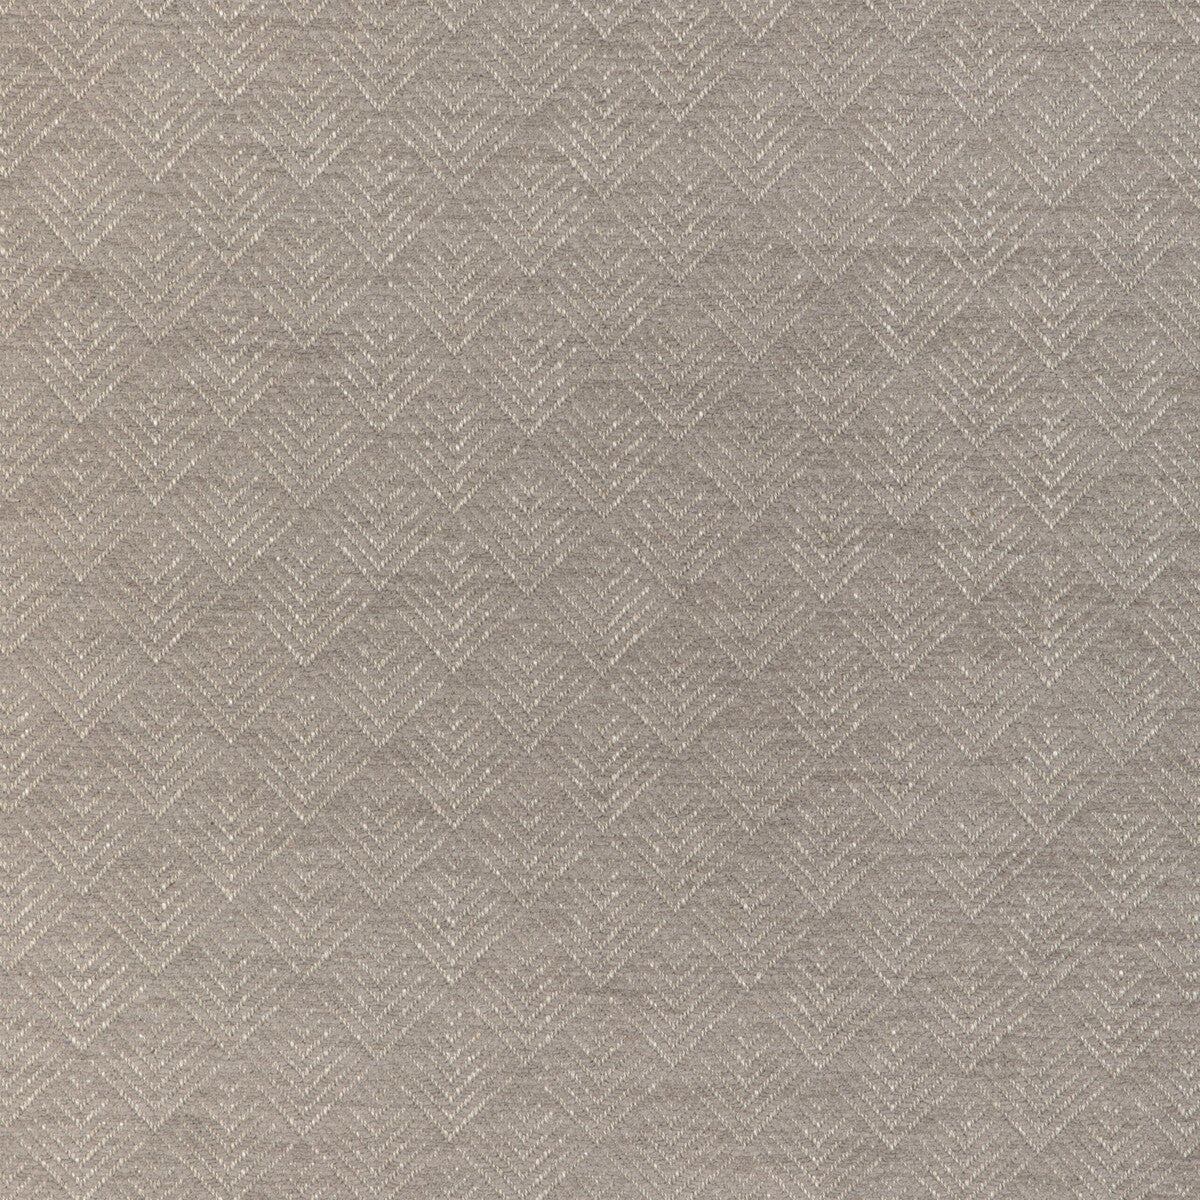 Kravert Design fabric in 36966-1611 color - pattern 36966.1611.0 - by Kravet Design in the Sustainable Textures II collection